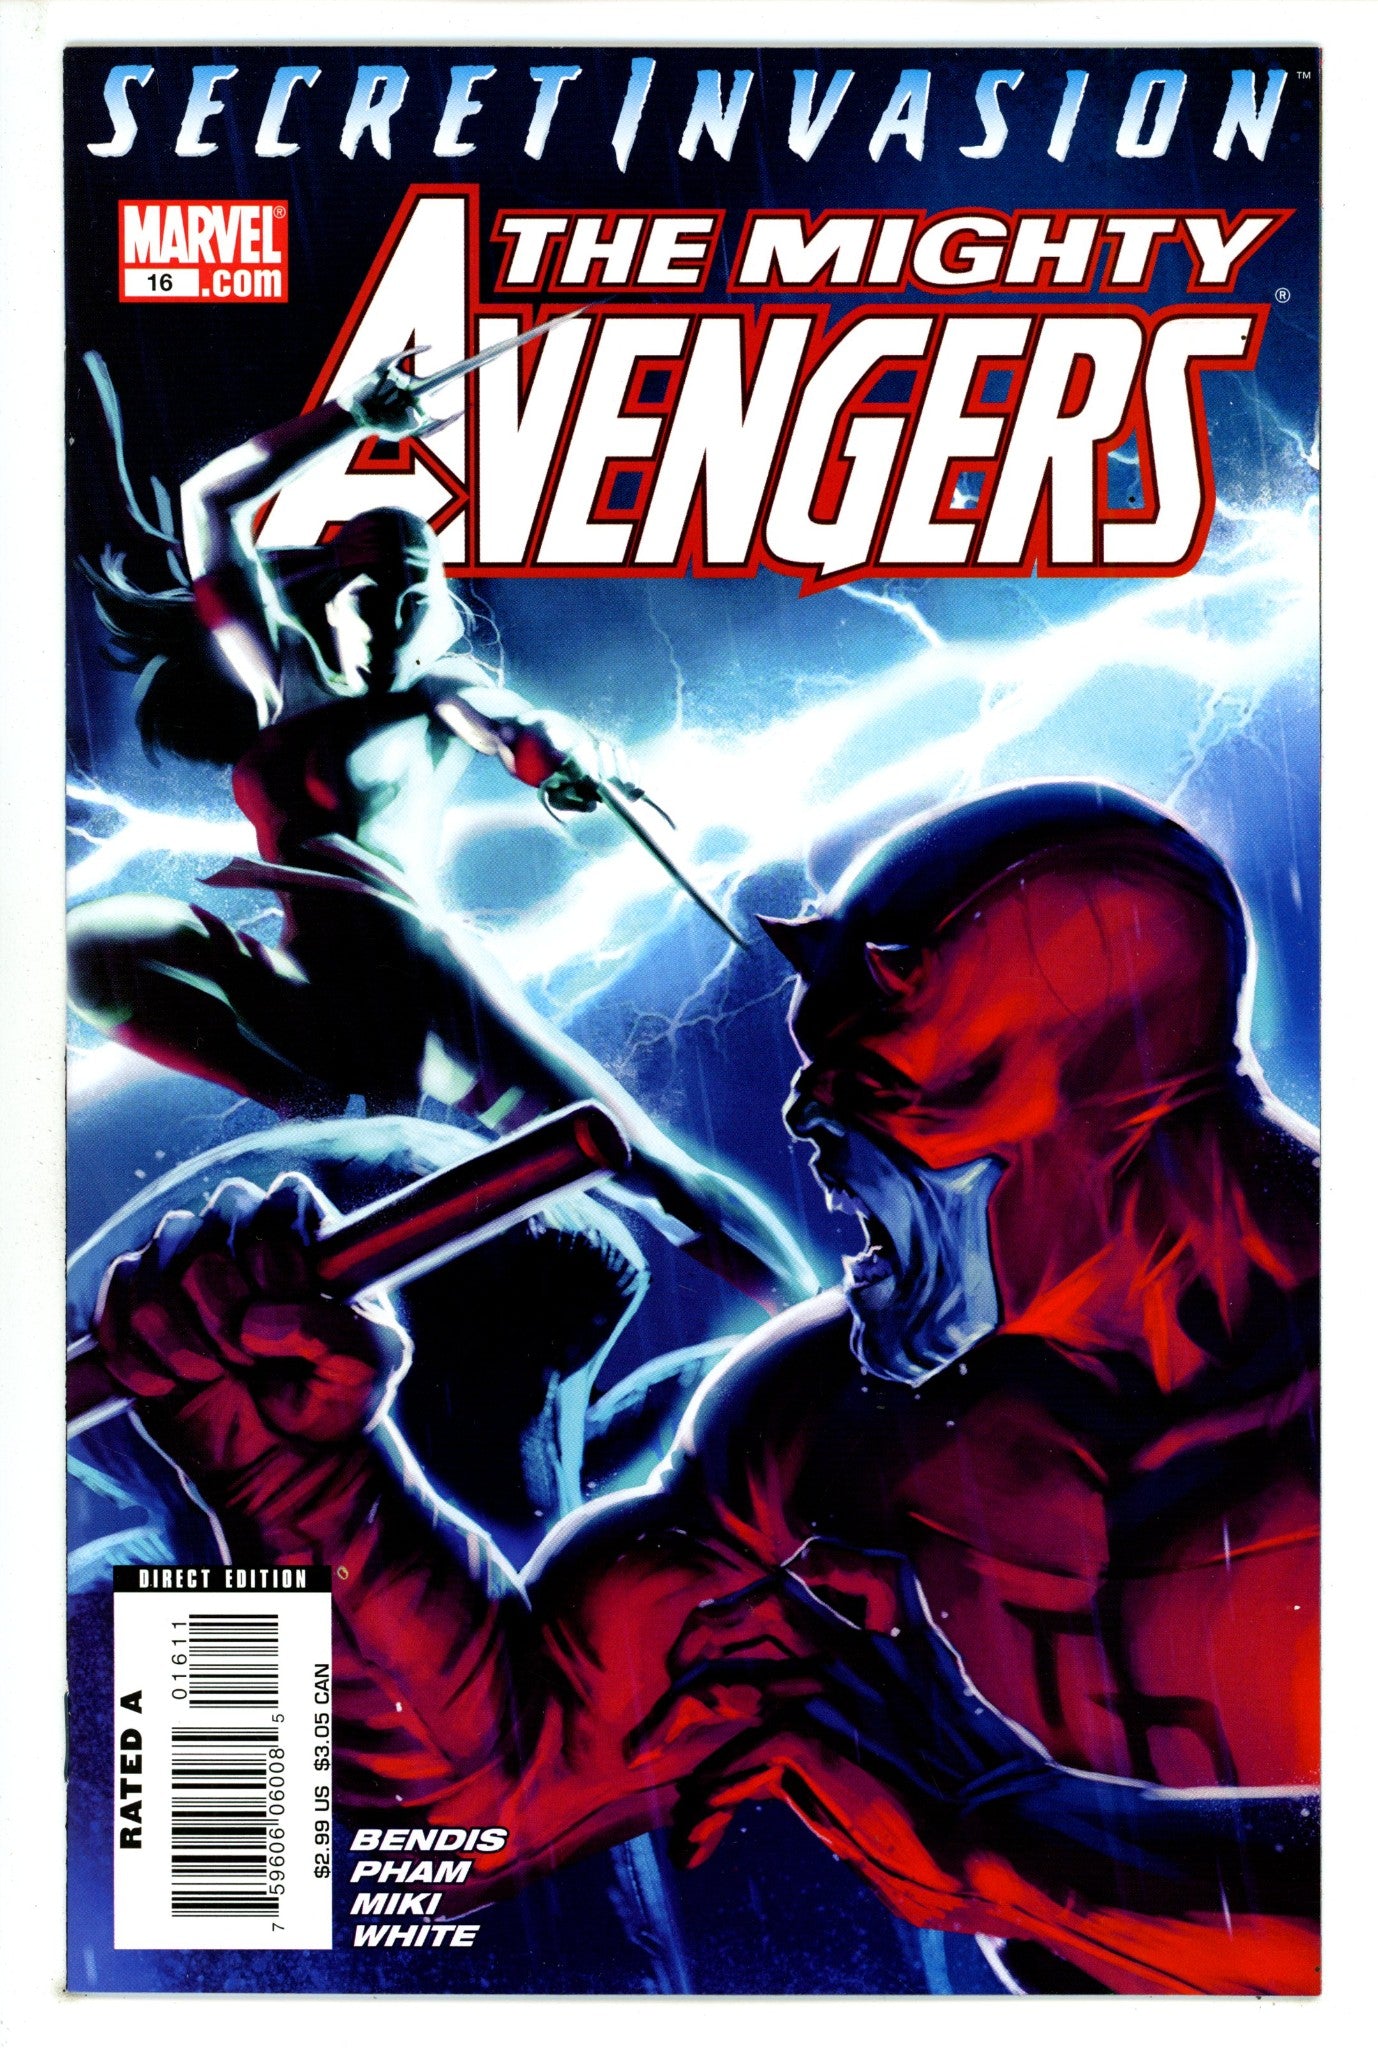 The Mighty Avengers Vol 1 16 High Grade (2008) 